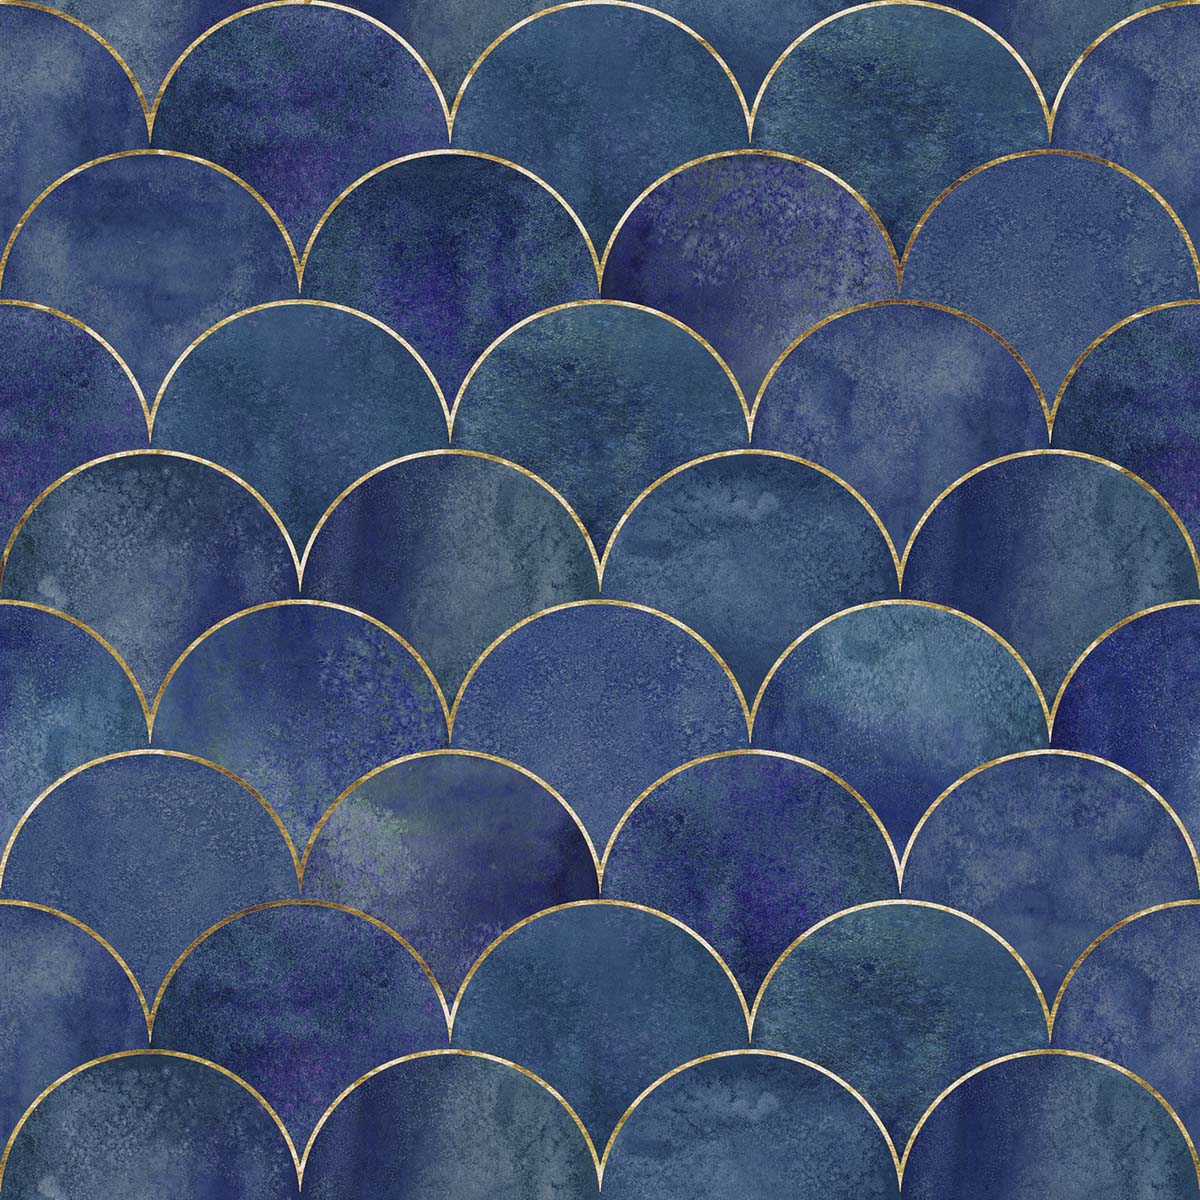 A blue and gold pattern